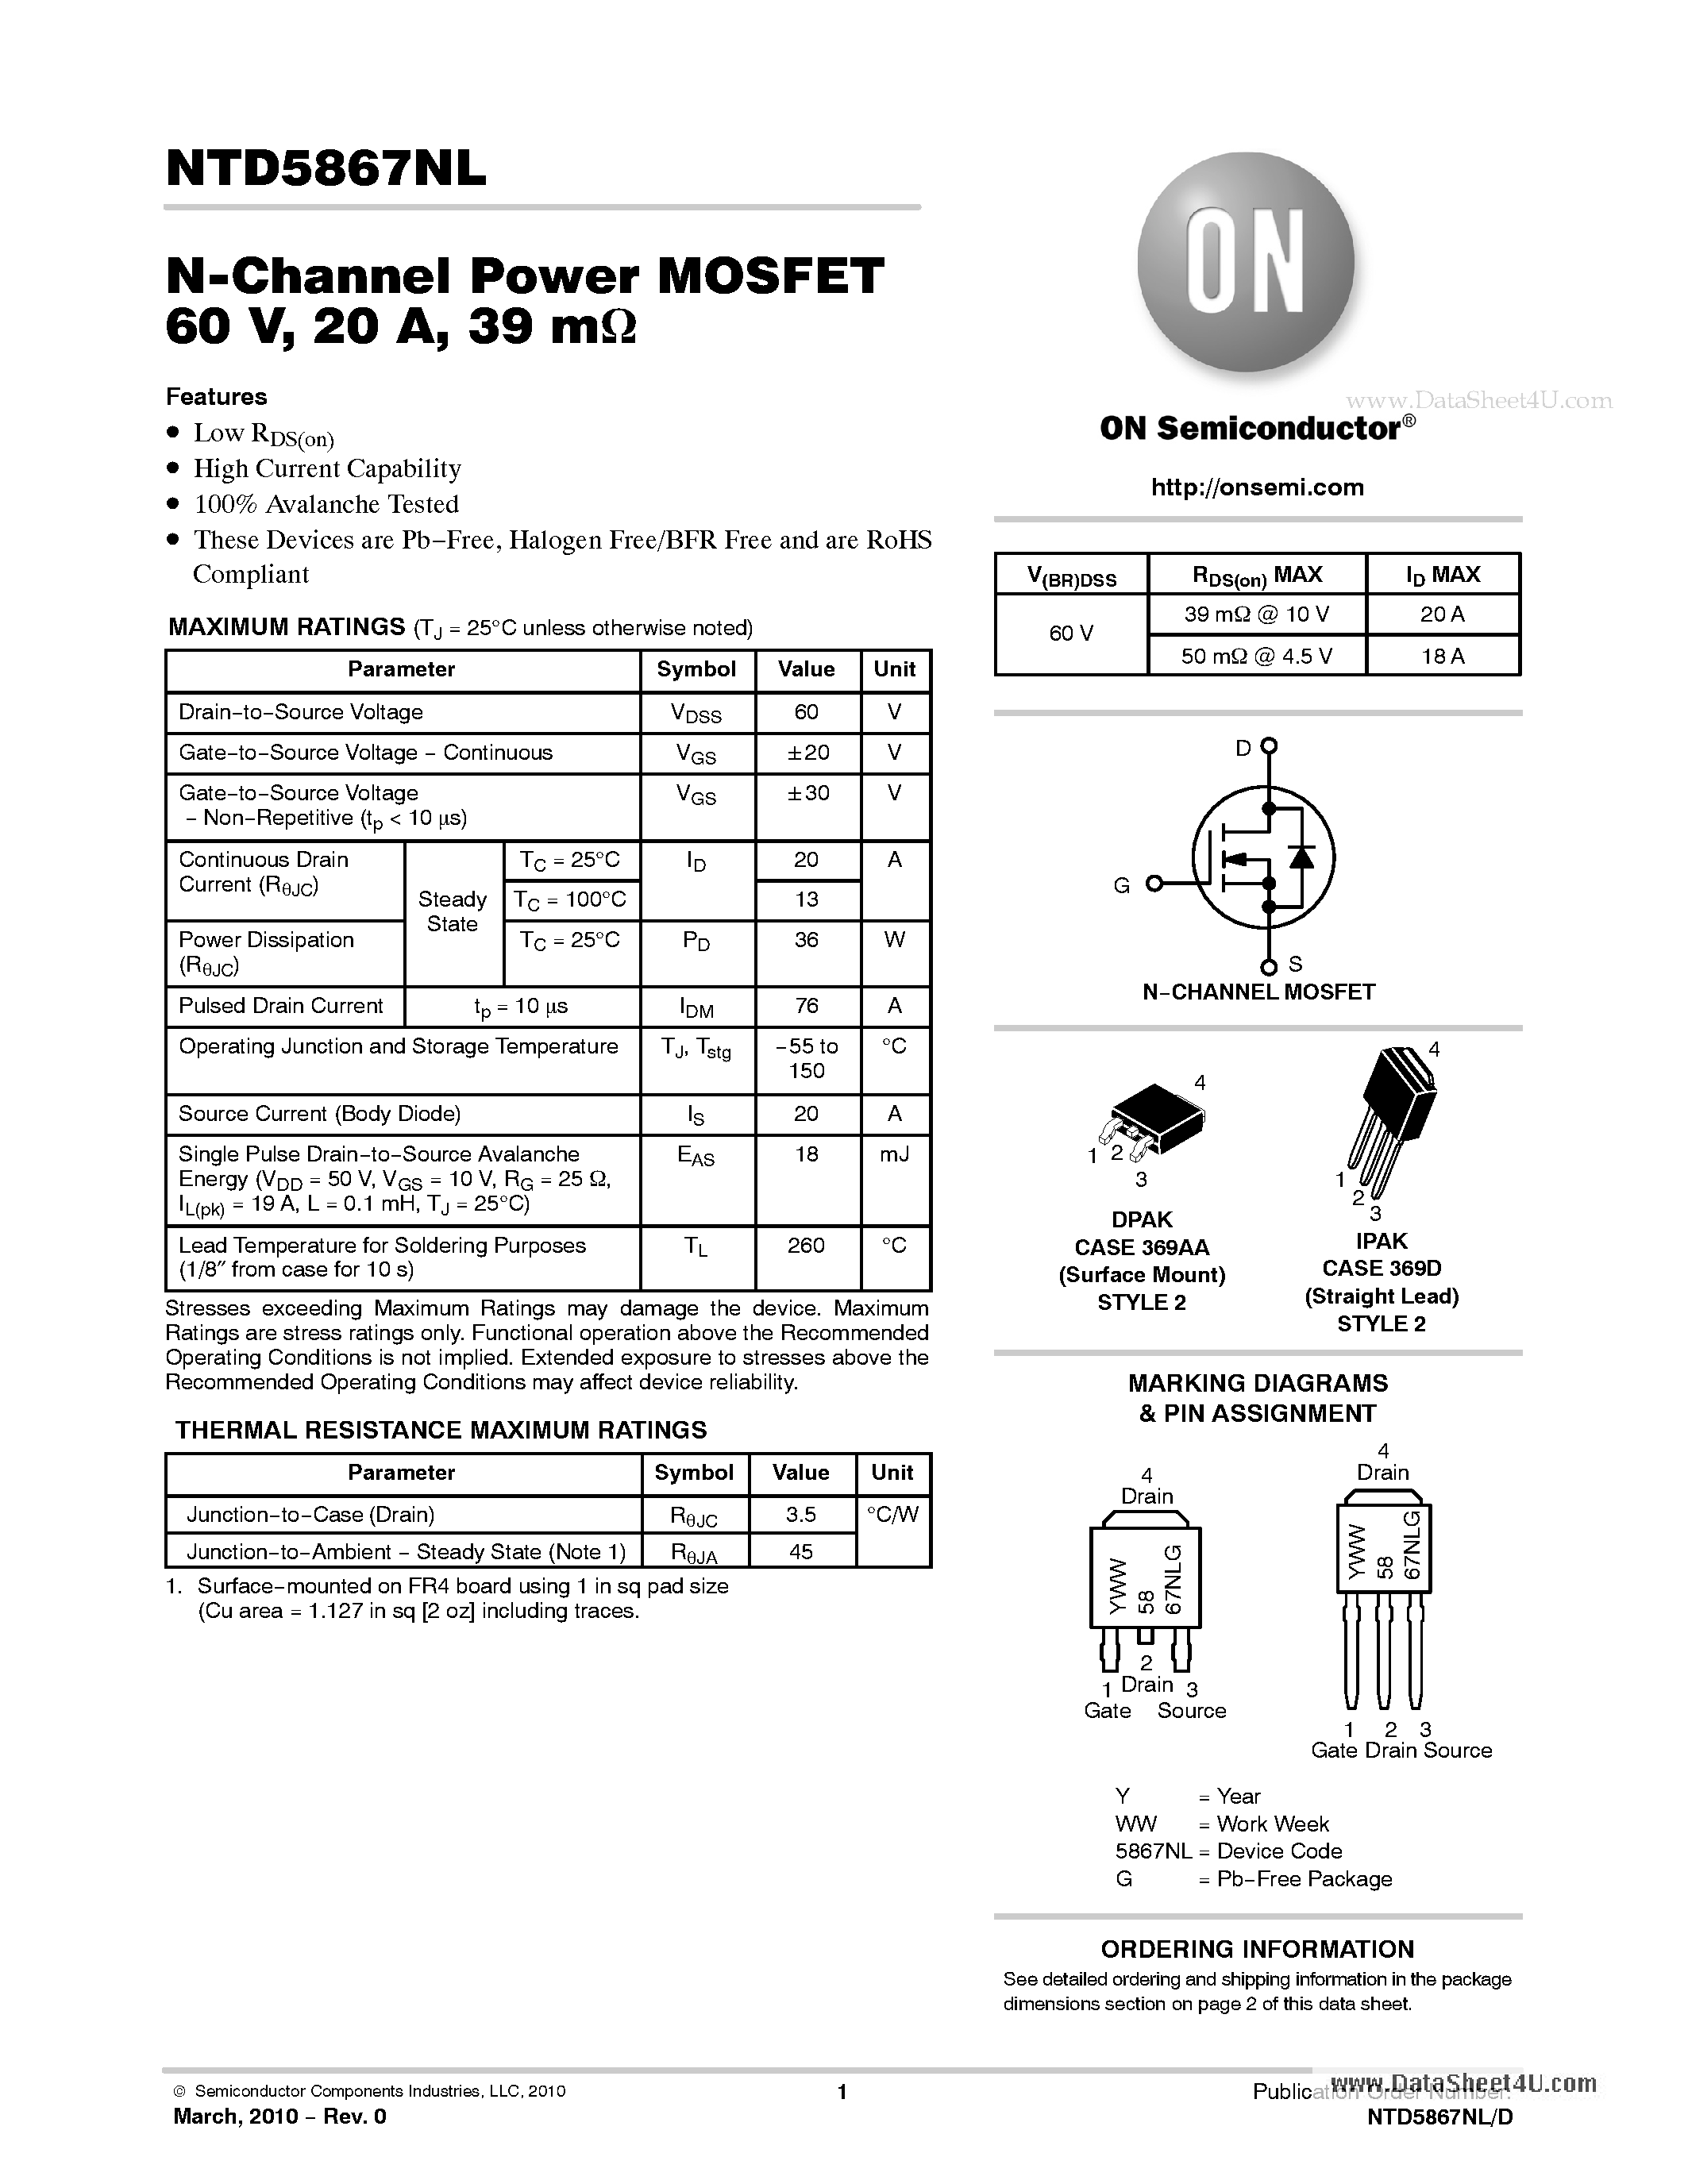 Даташит NTD5867NL - N-Channel Power MOSFET 60 V / 20 A / 39 m ome страница 1